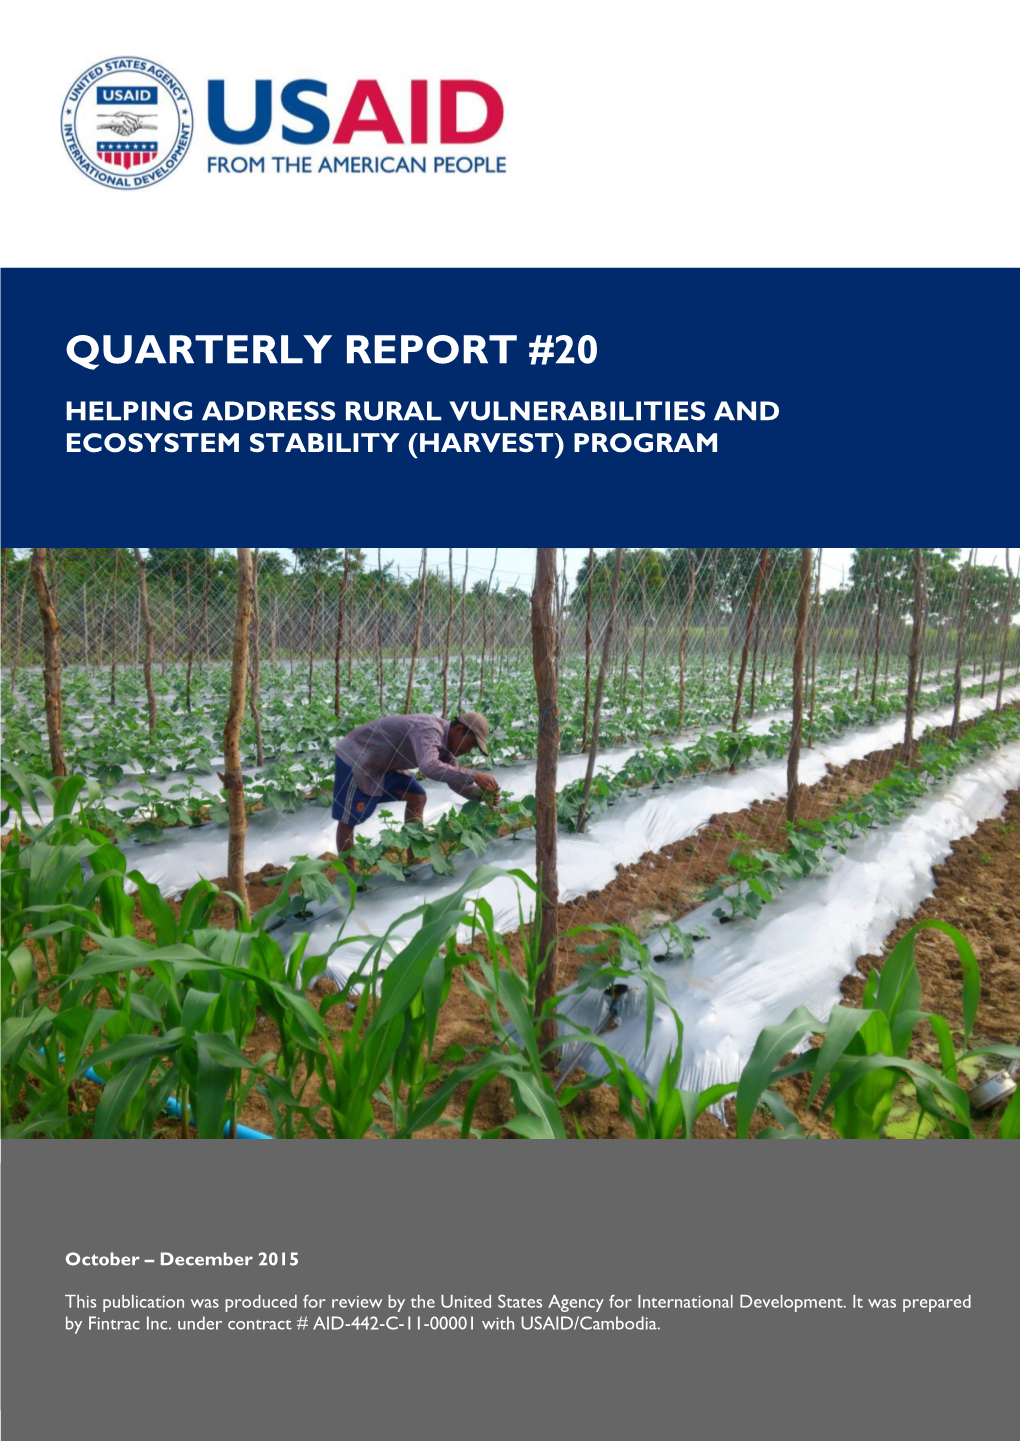 Quarterly Report #20 Helping Address Rural Vulnerabilities and Ecosystem Stability (Harvest) Program